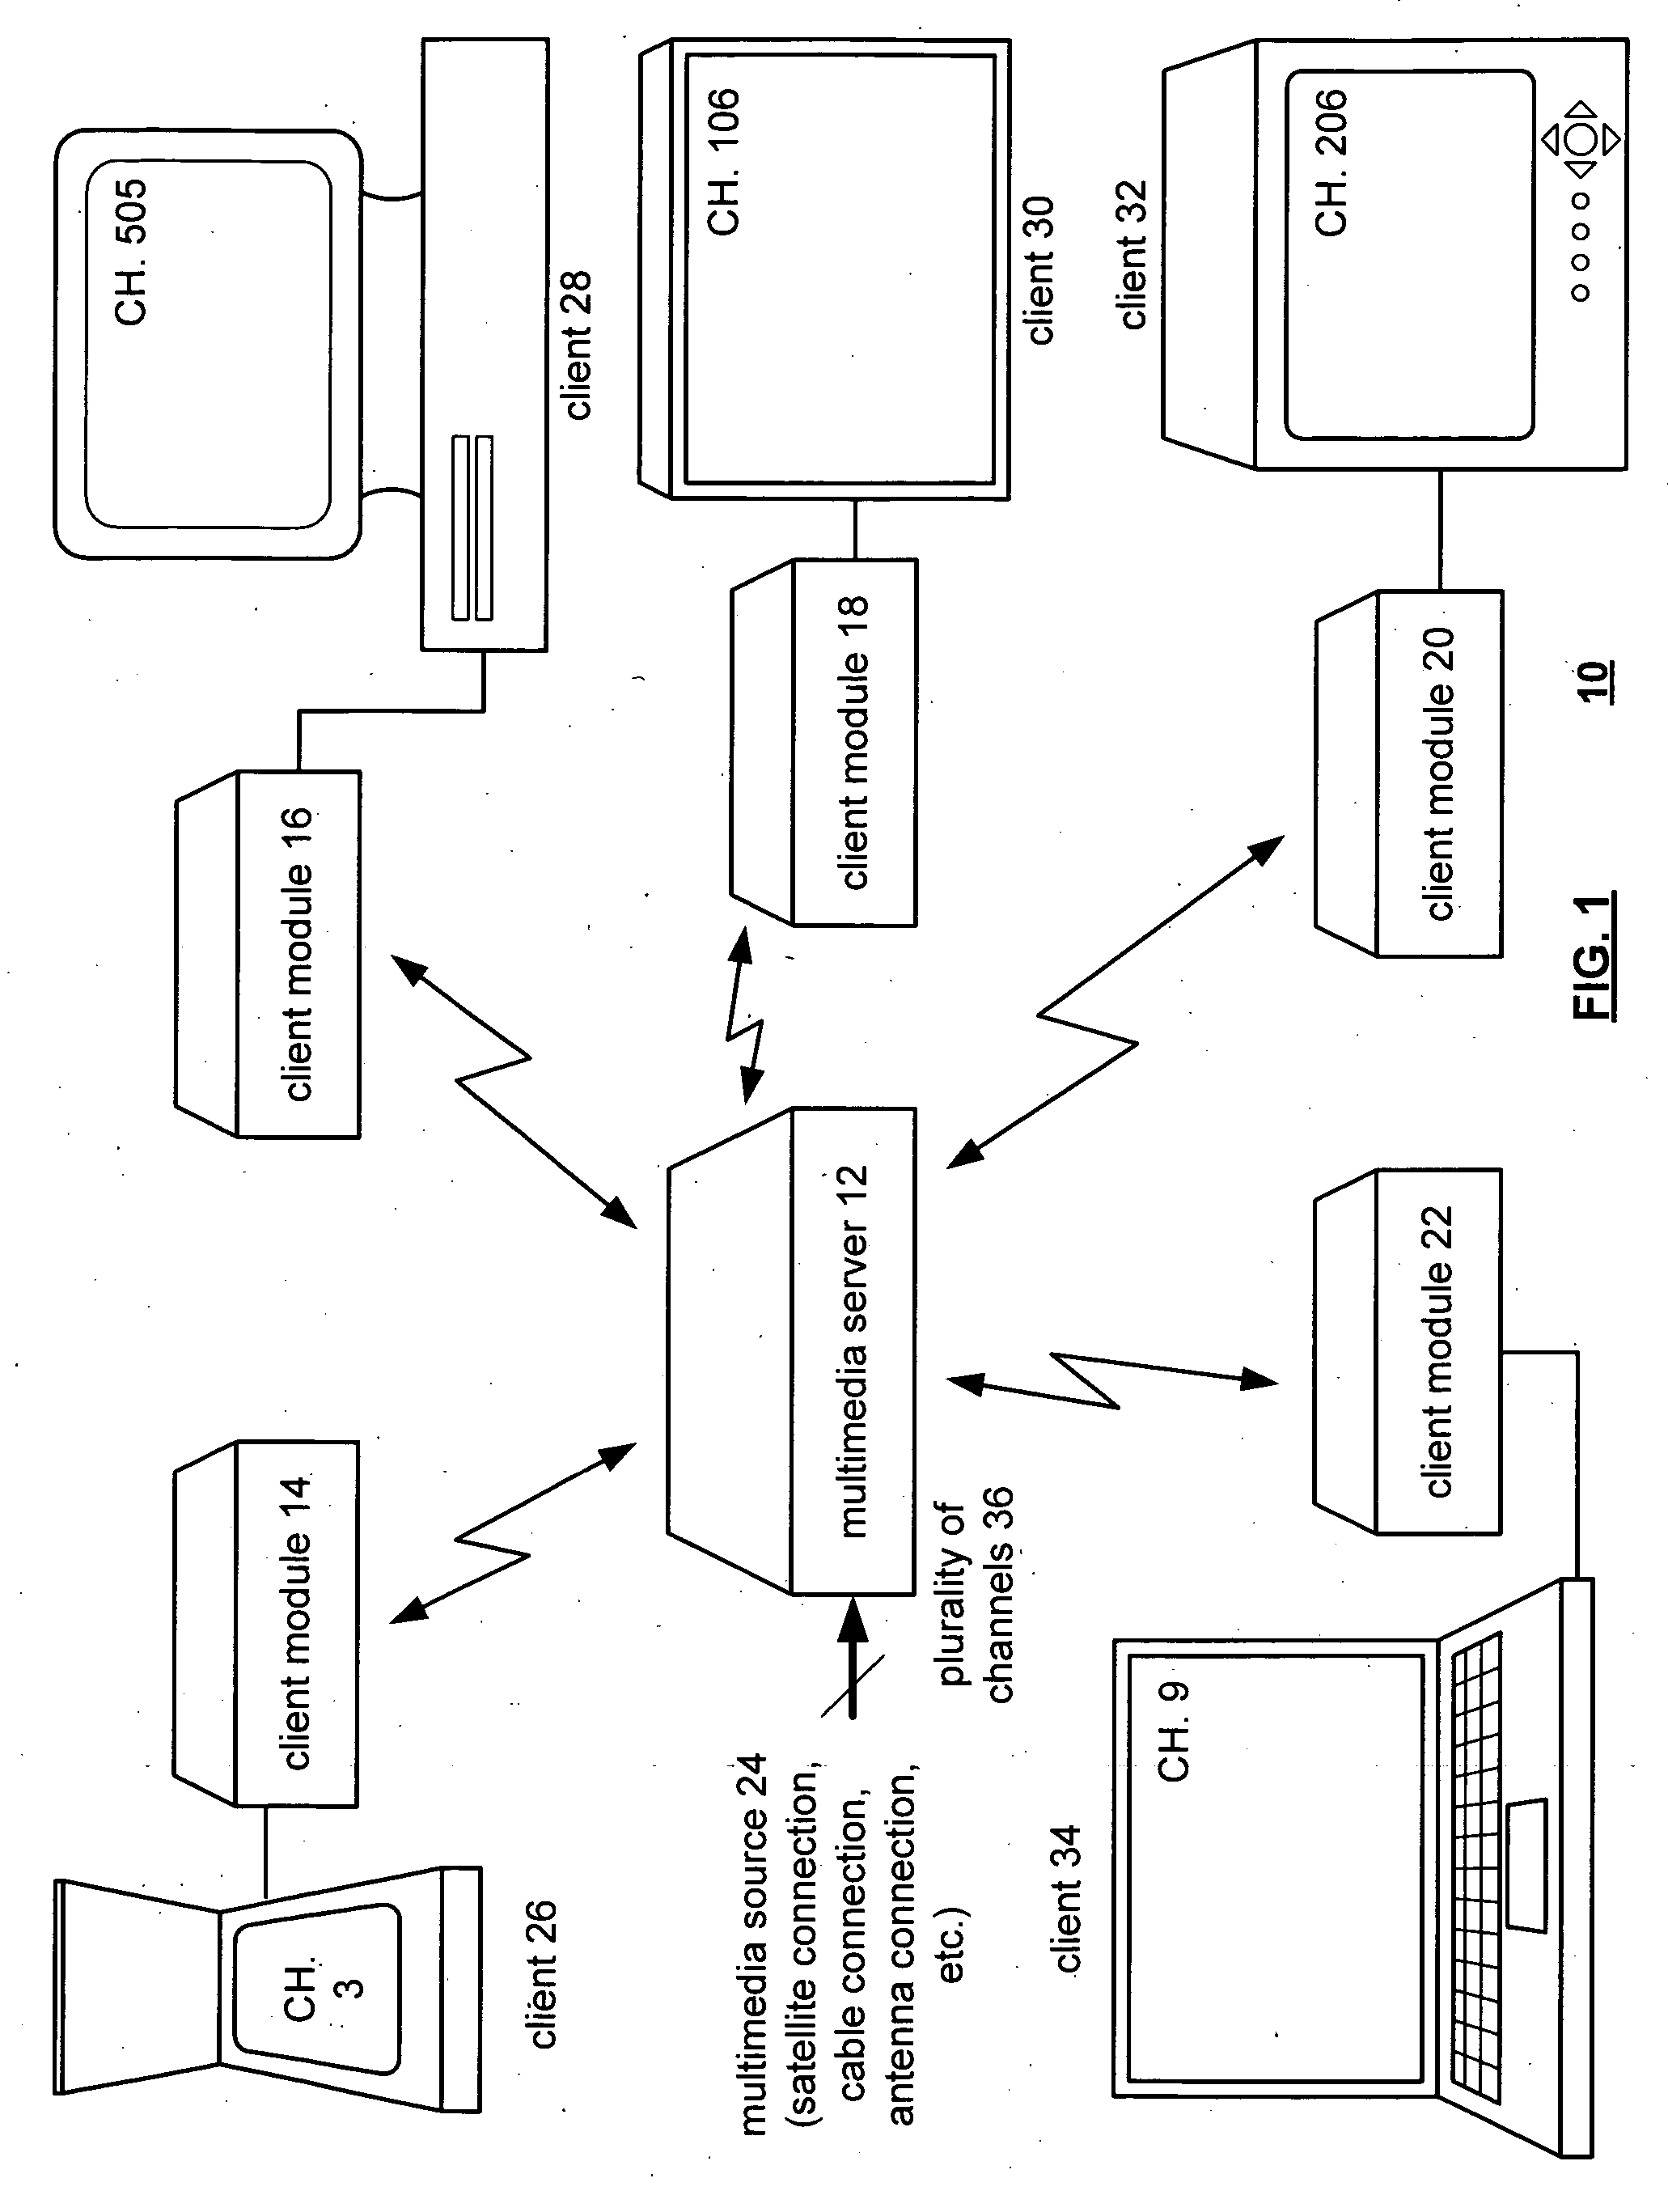 Channel selection in a multimedia system